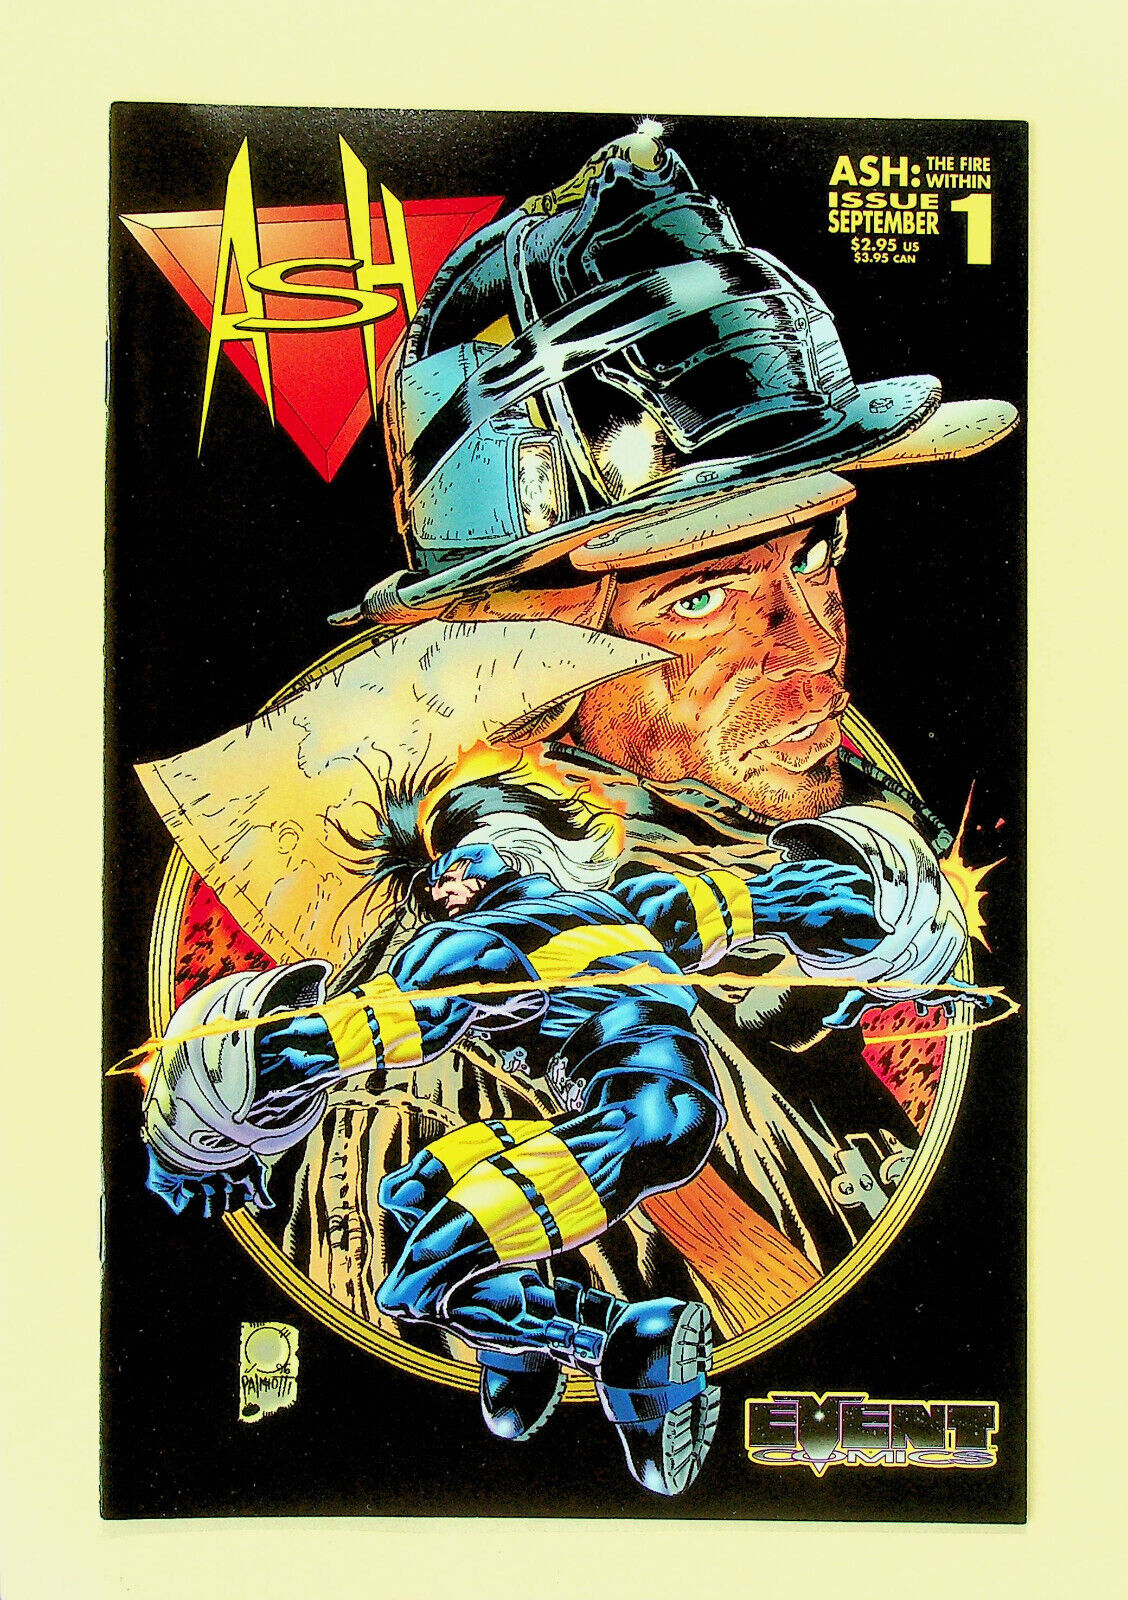 Ash: The Fire Within #1 (Sep 1996, Event) - Near Mint